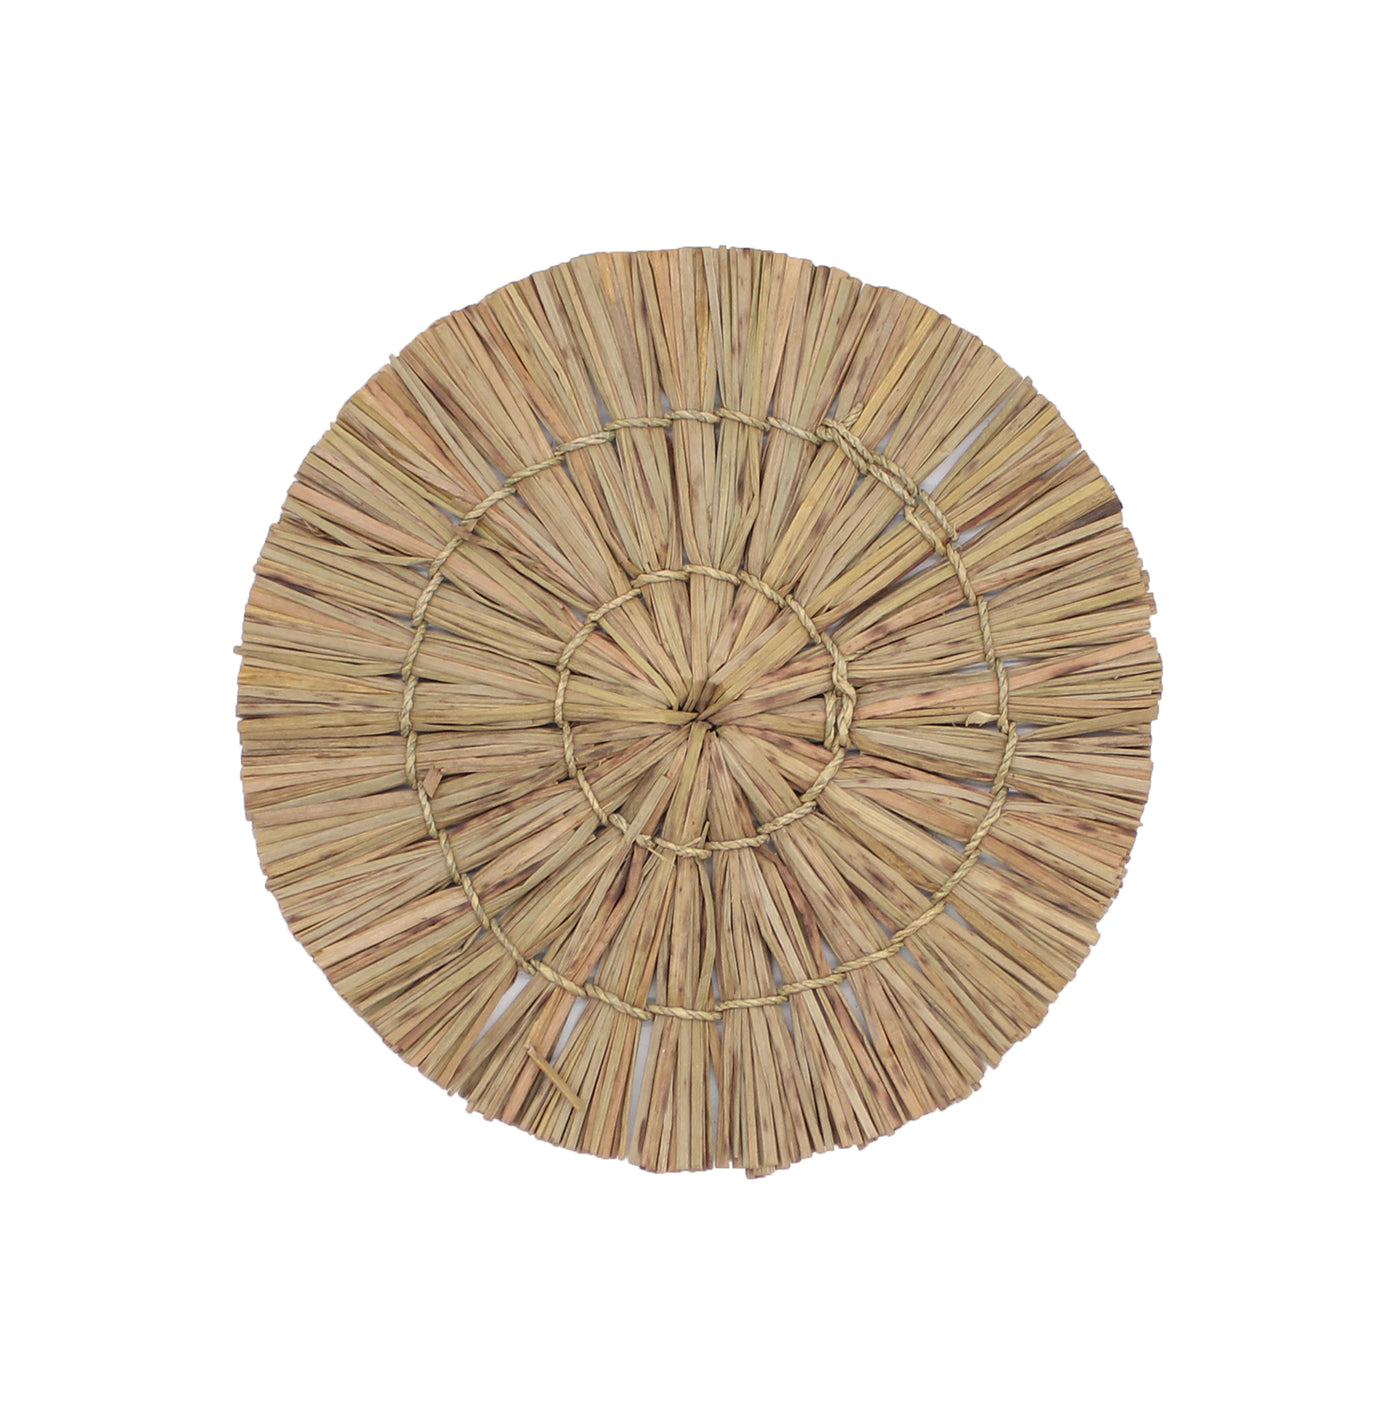 Set Of 6 Bohemian Round Natural Black Seagrass Wall Art In Natural & Smoked Black Colors .